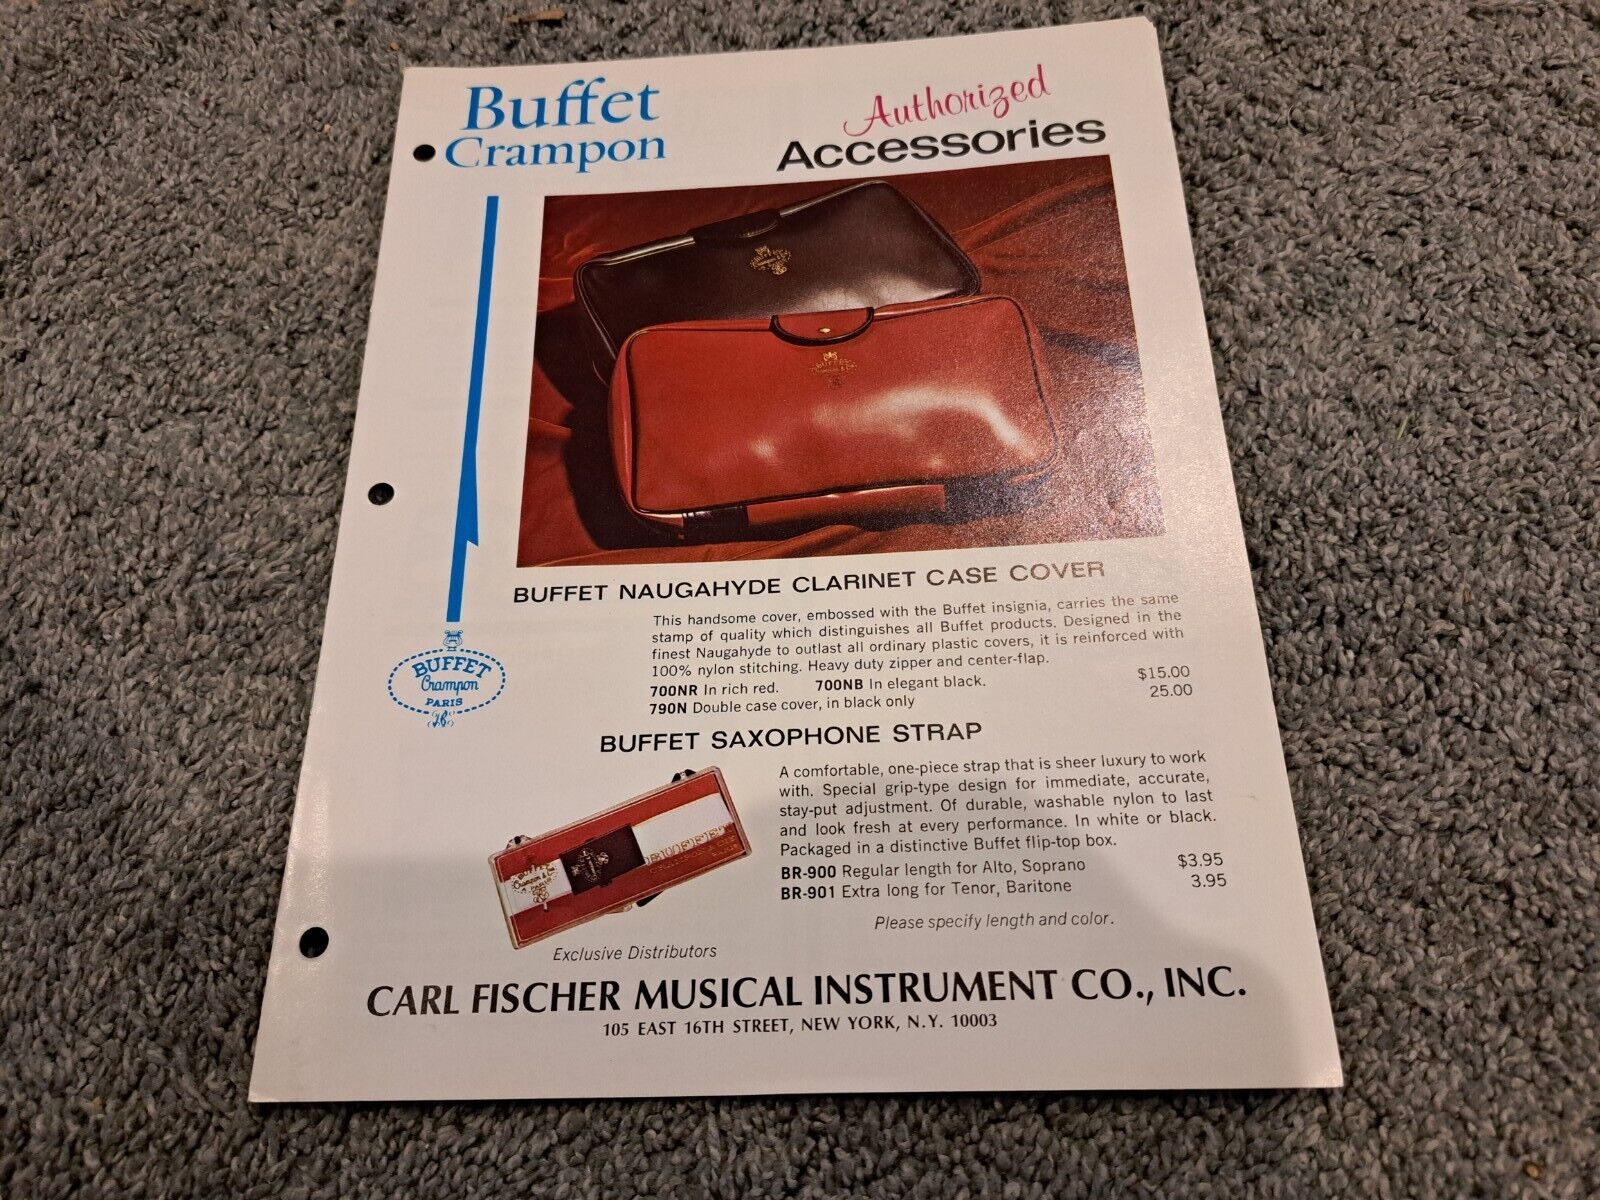 Vintage Buffet Crampon Accessories Catalog for Clarinet Mouthpieces